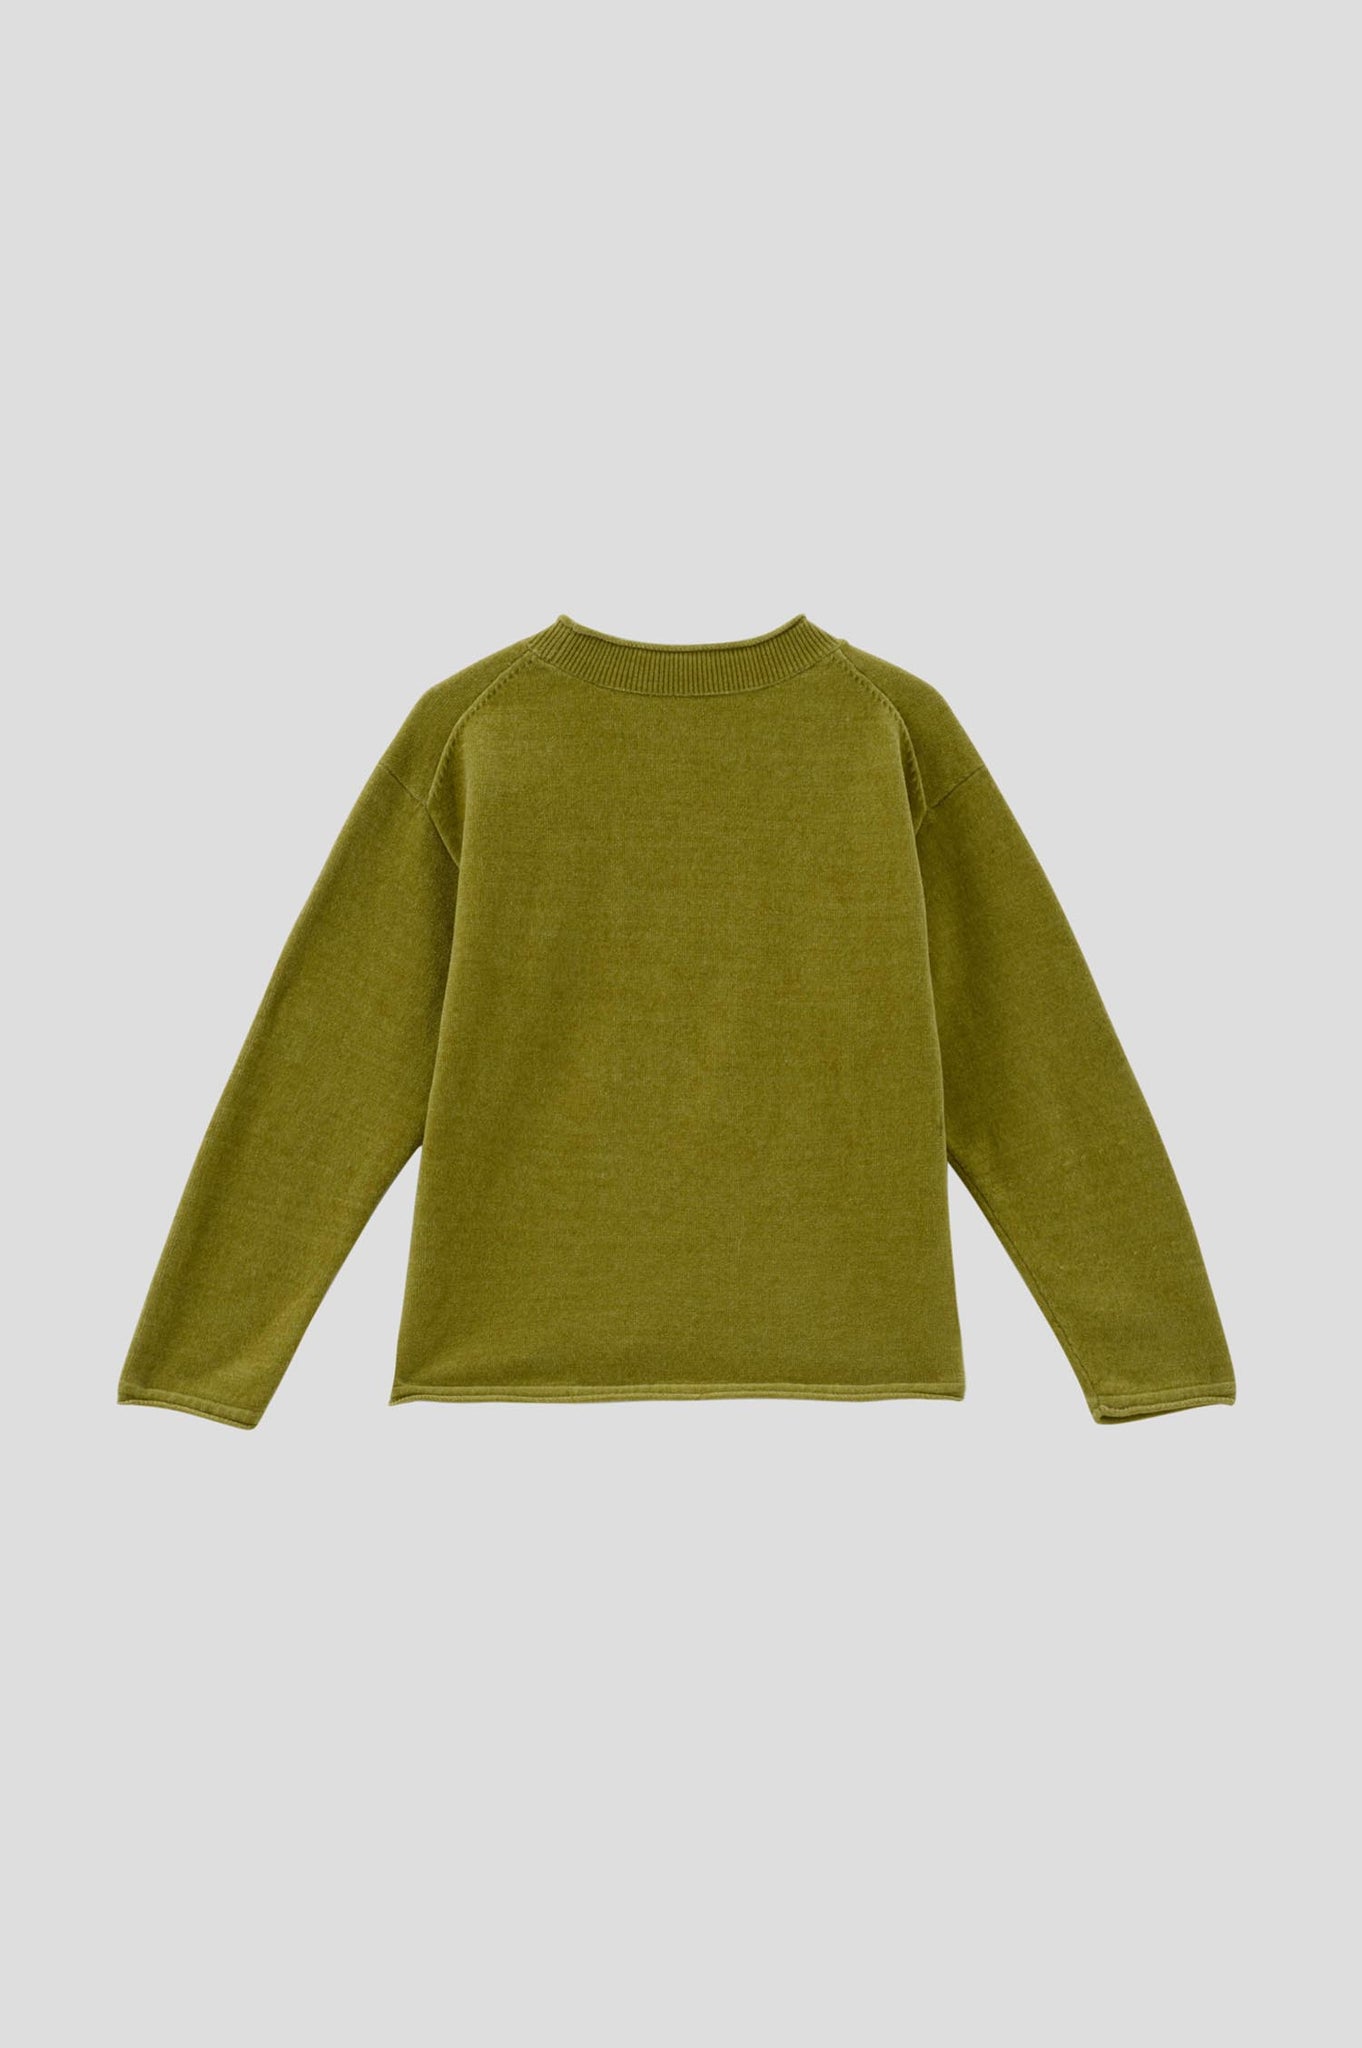 Sweater / JNBYHOME Kids' Loose Fit Pullover Crewneck Sweater